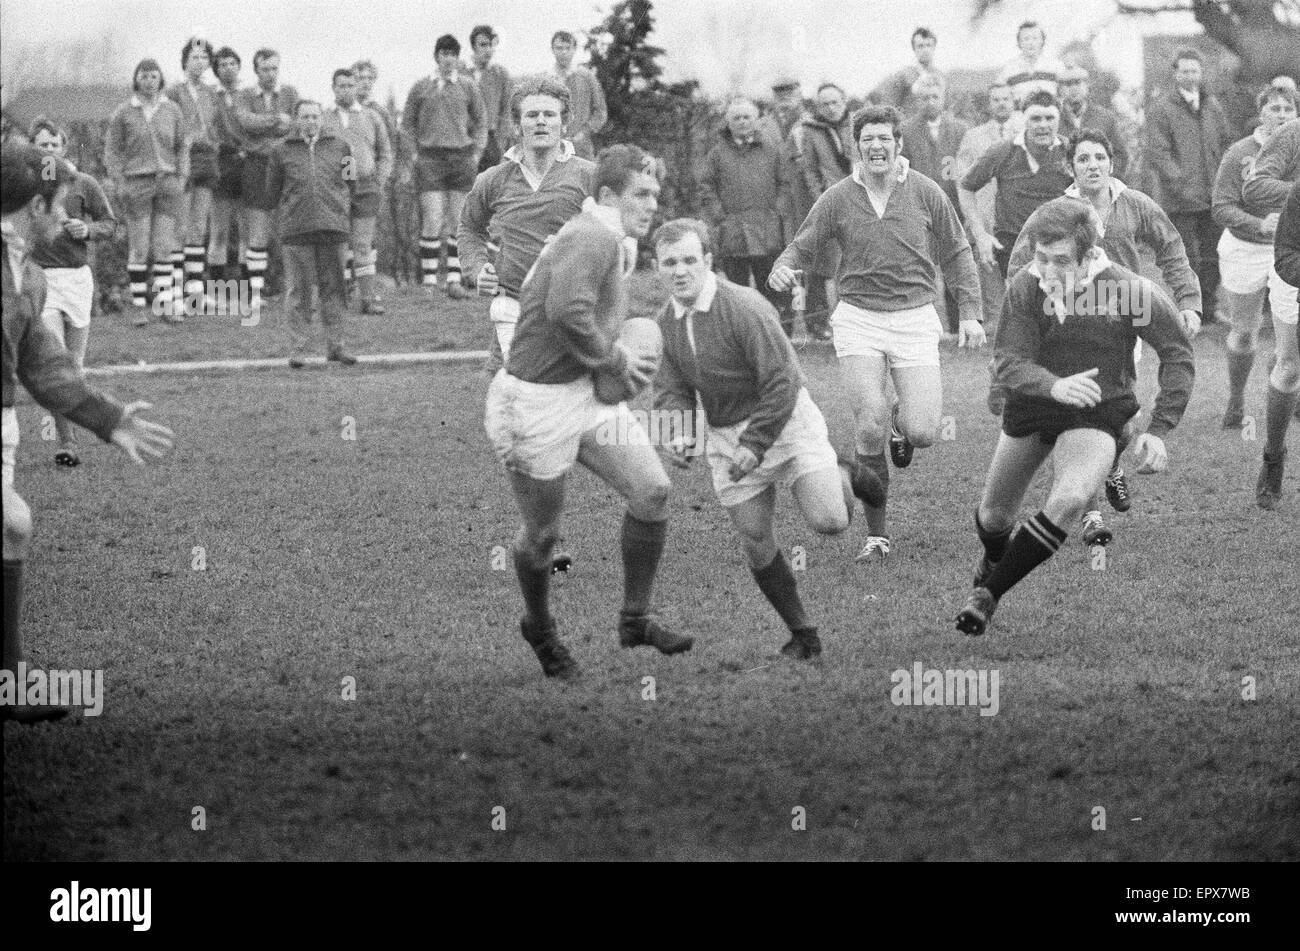 London Wasps v Llanelli Scarlets, Rugby Union match, marzo 1970. Foto Stock